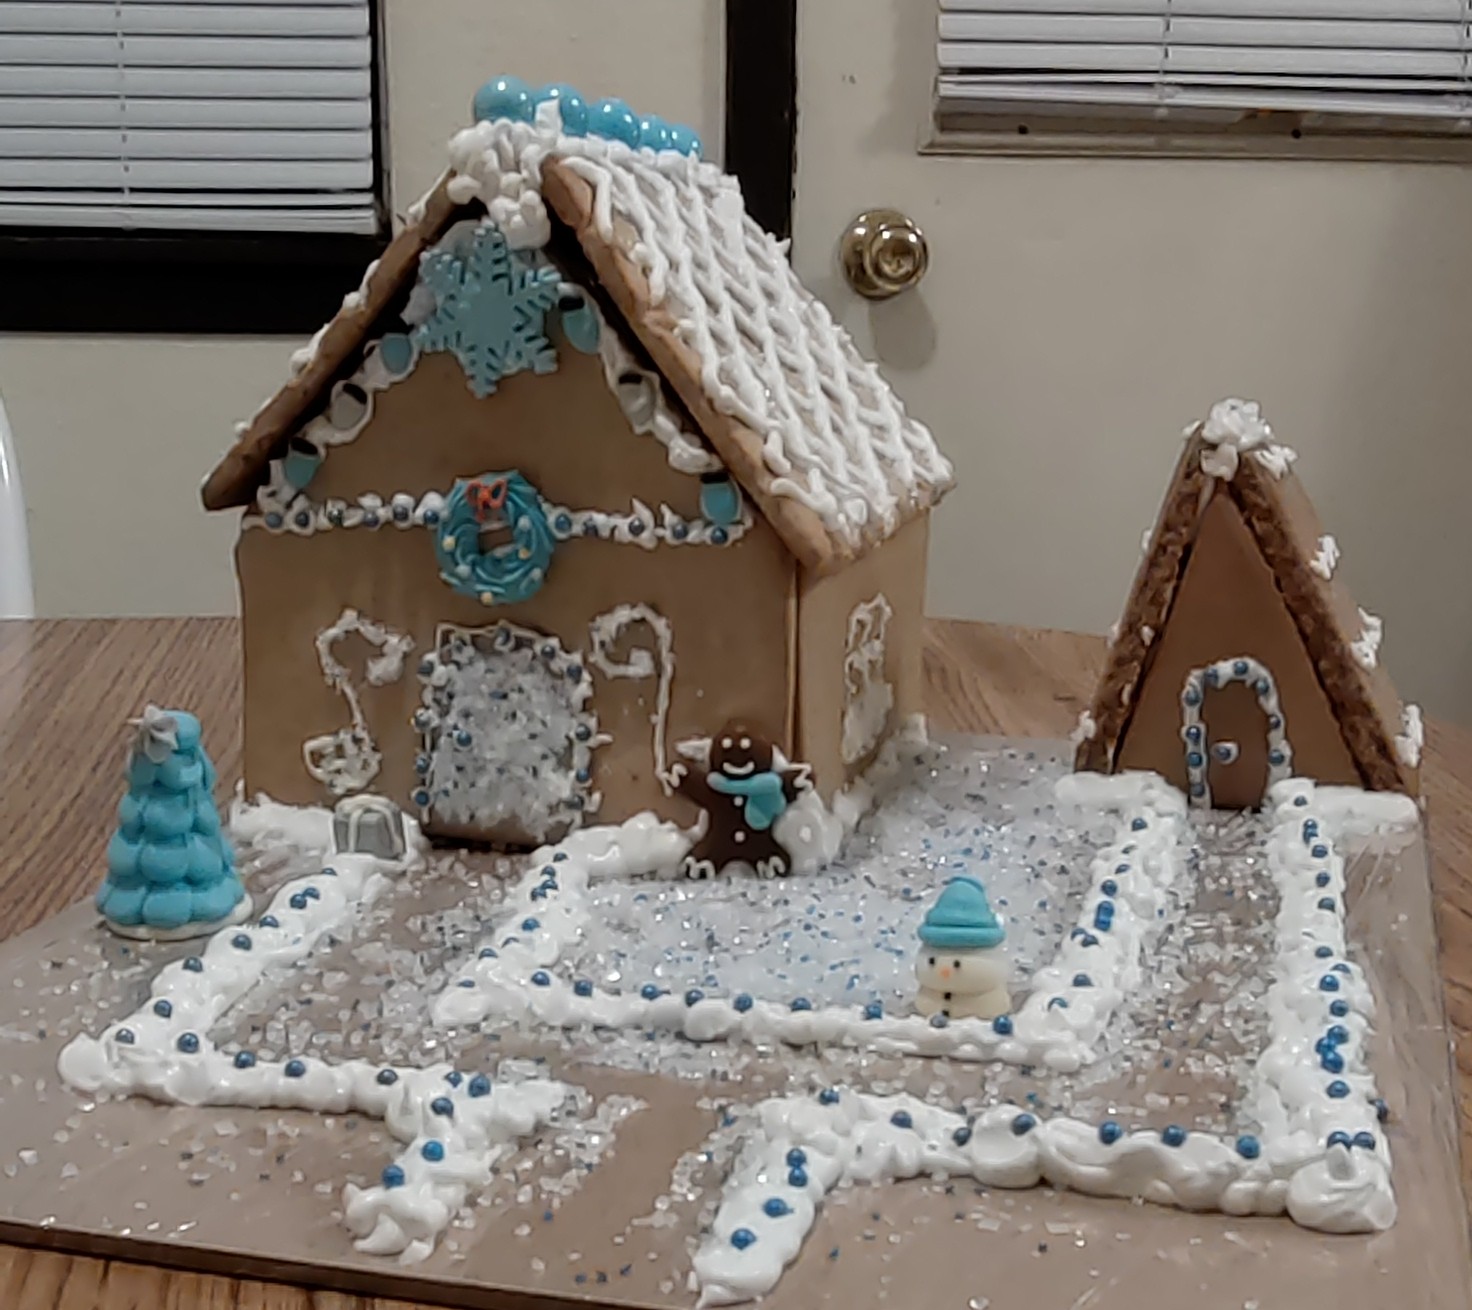 A gingerbread house with white icing on the roof and a white icing path to the ADU.